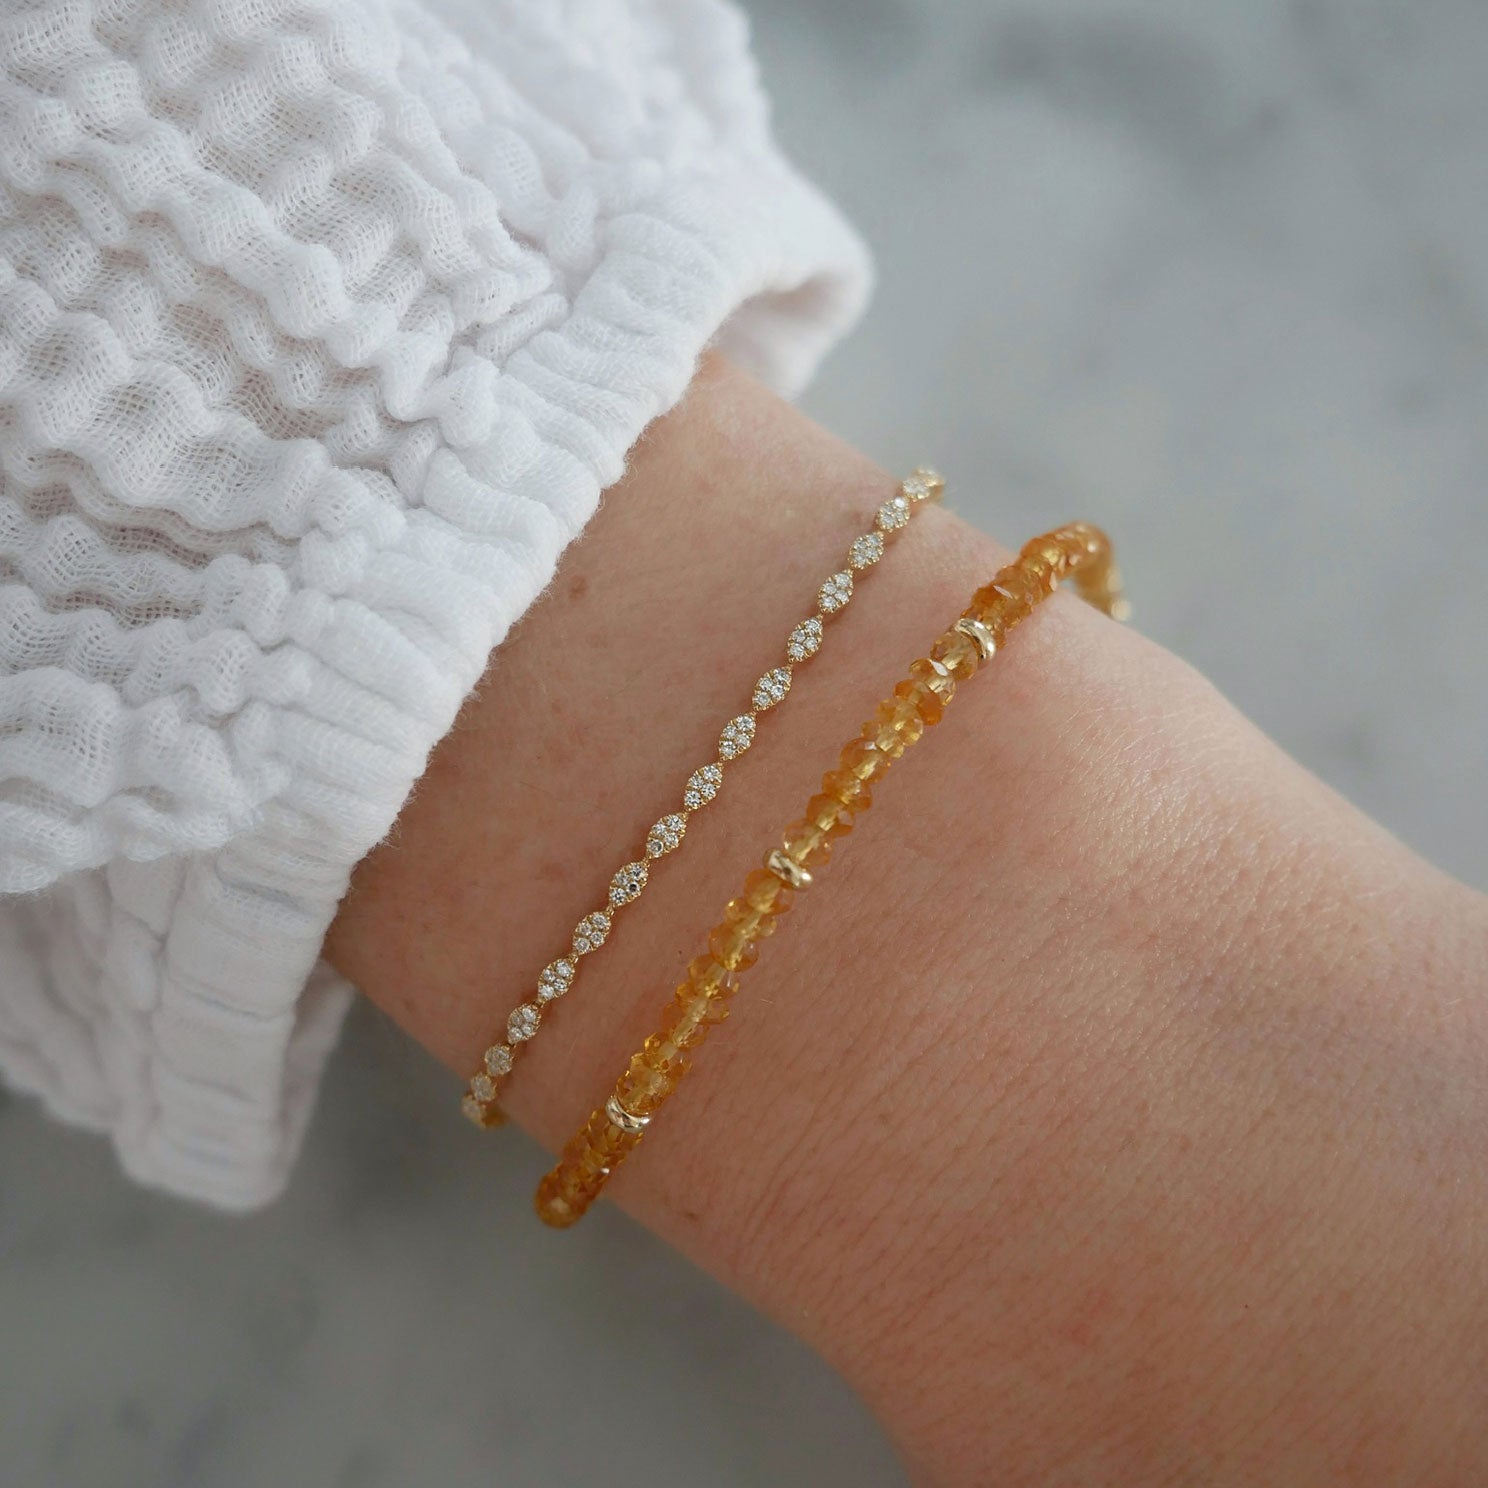 Birthstone Bead Bracelet In Citrine styled on wrist of model with diamond marquise bracelet and white sleeve